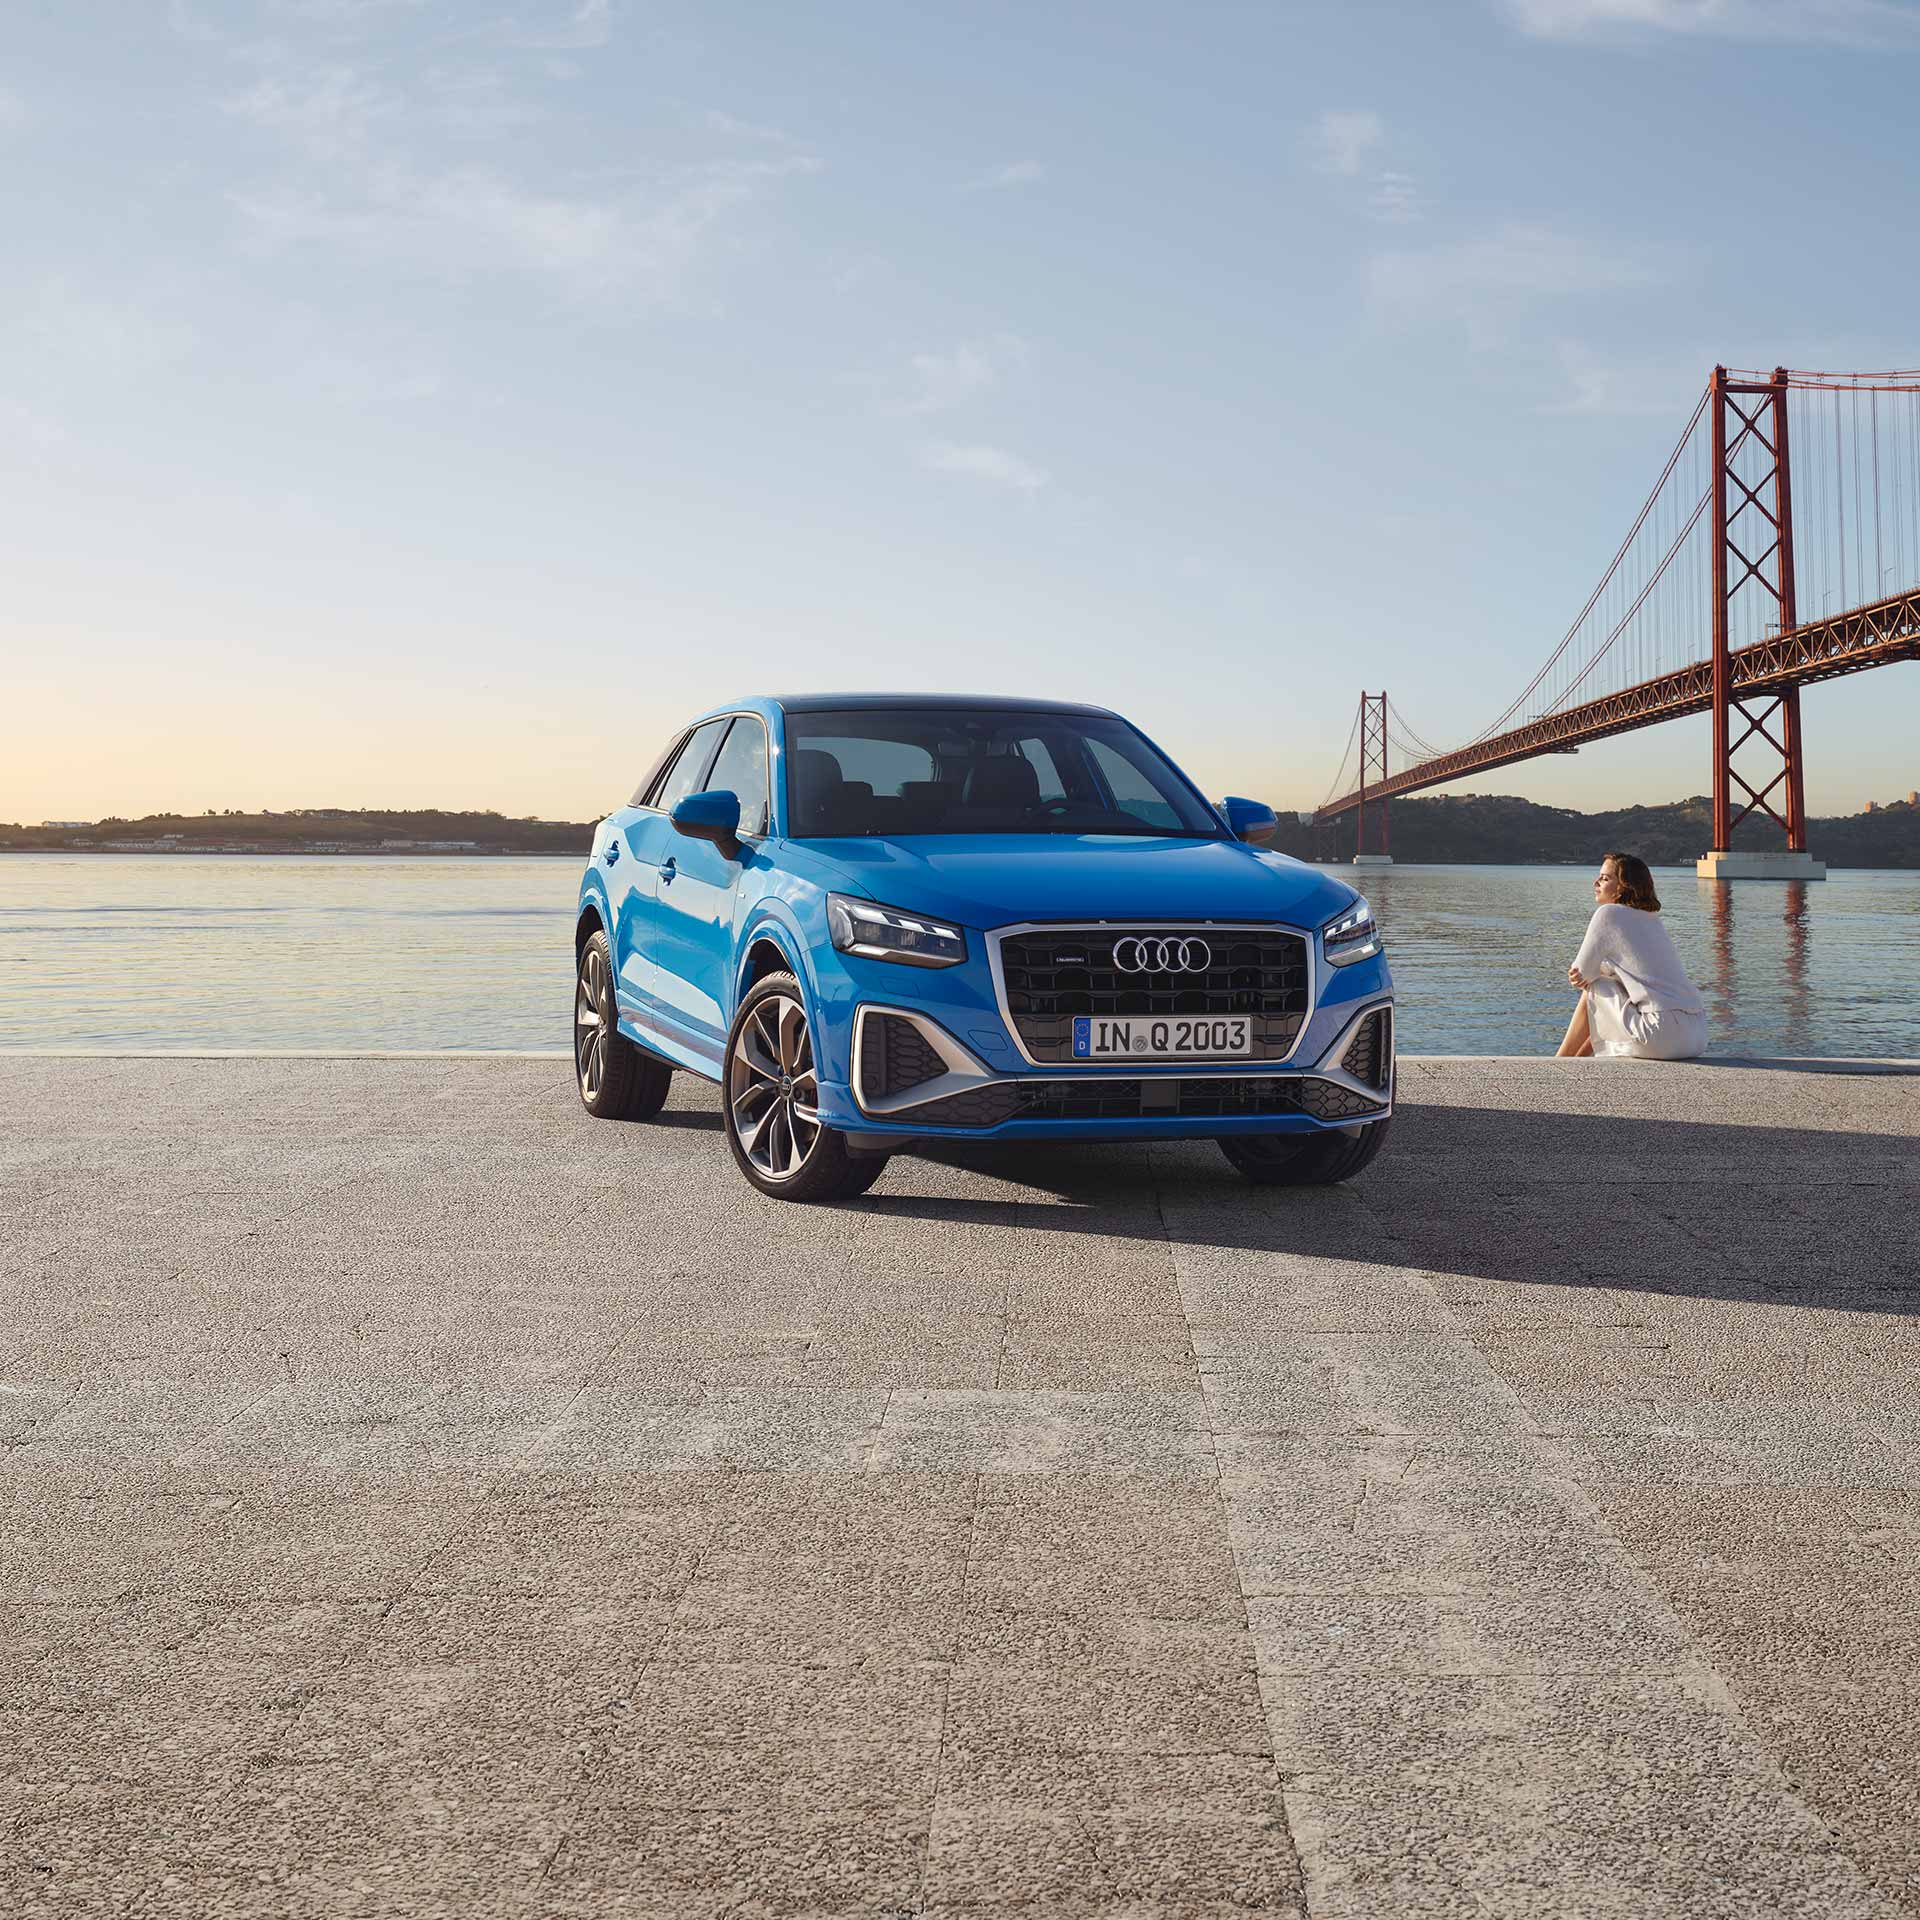 The Audi Q2 in front view